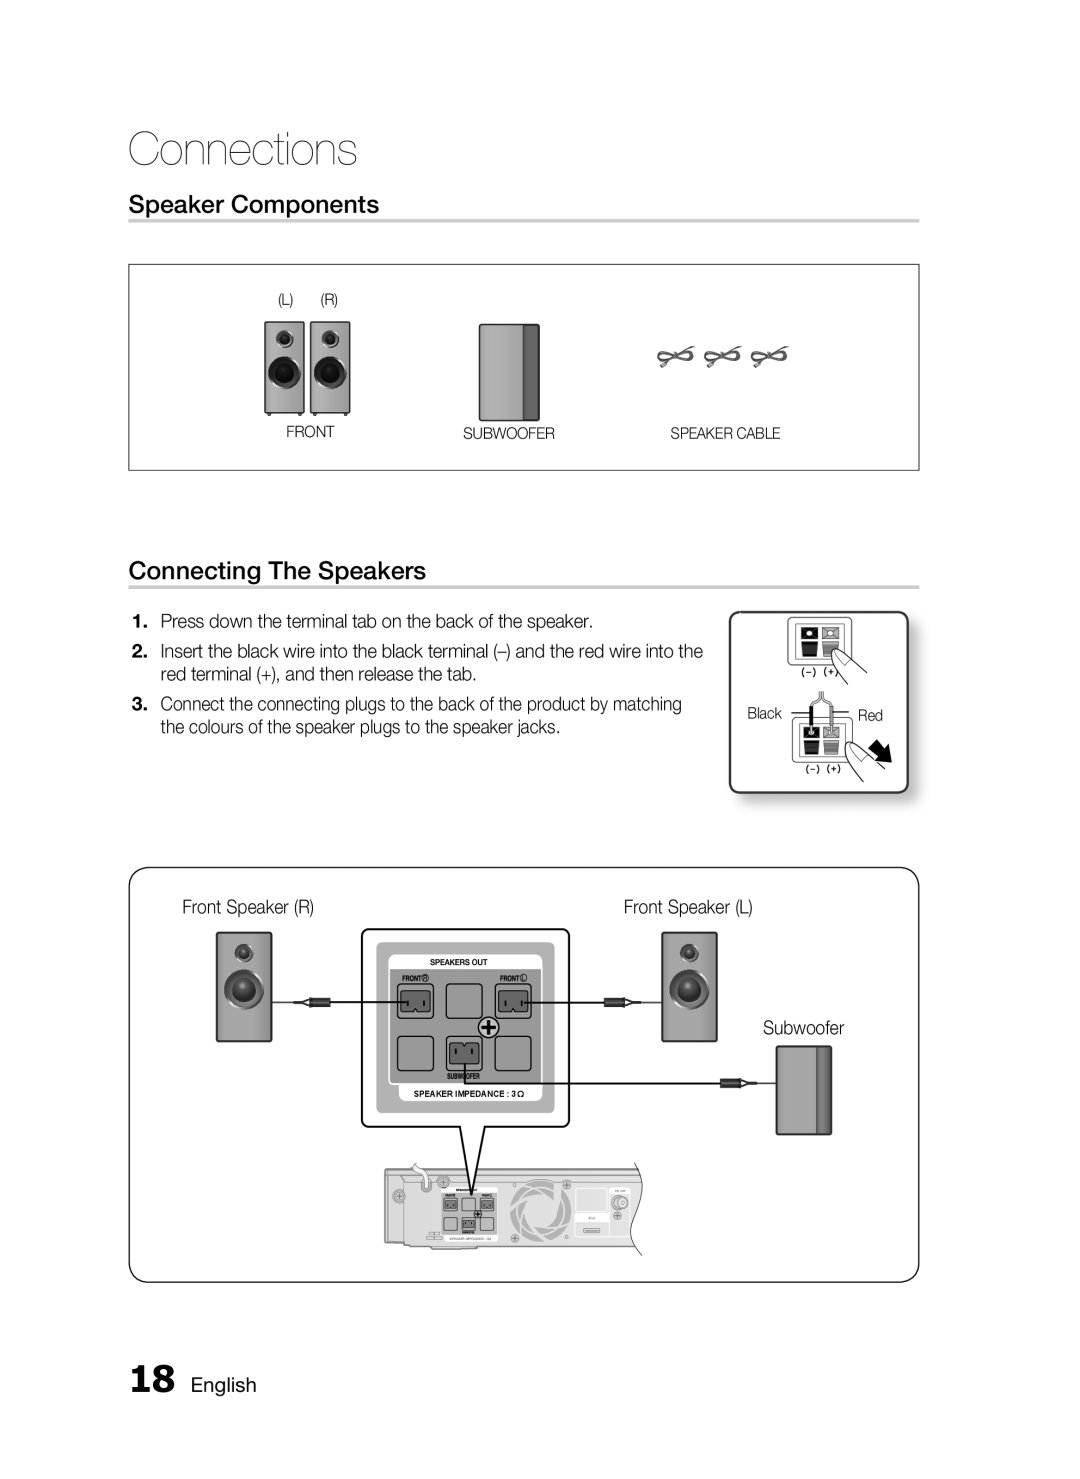 Samsung HT-C5200 user manual Speaker Components, Connecting The Speakers, English, Connections 